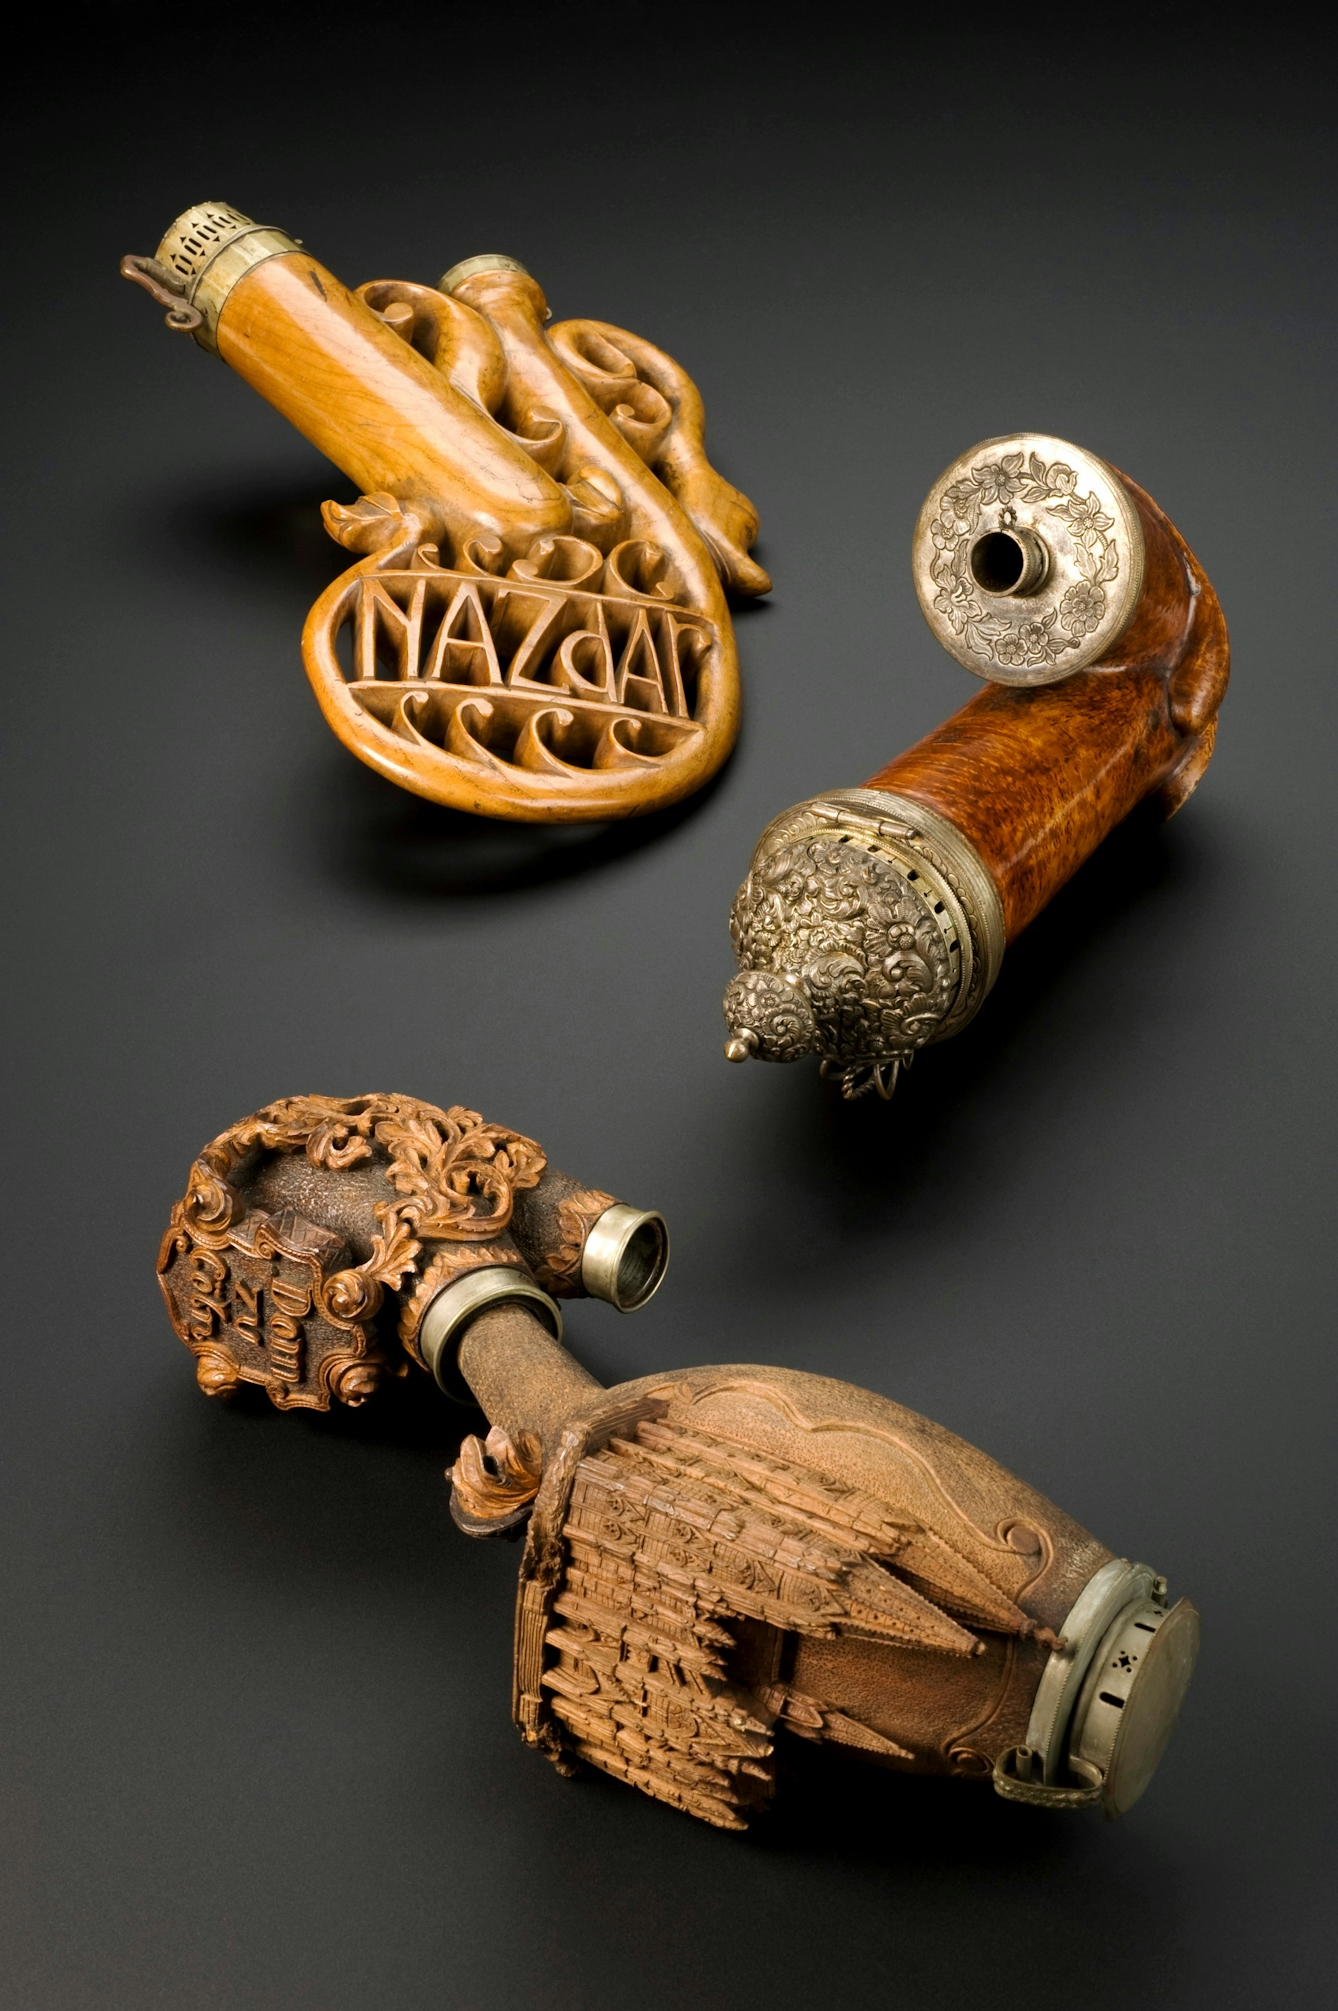 Pipes carved into a horn shape from wood, with decorative swirls and leaf-like ornamentation.